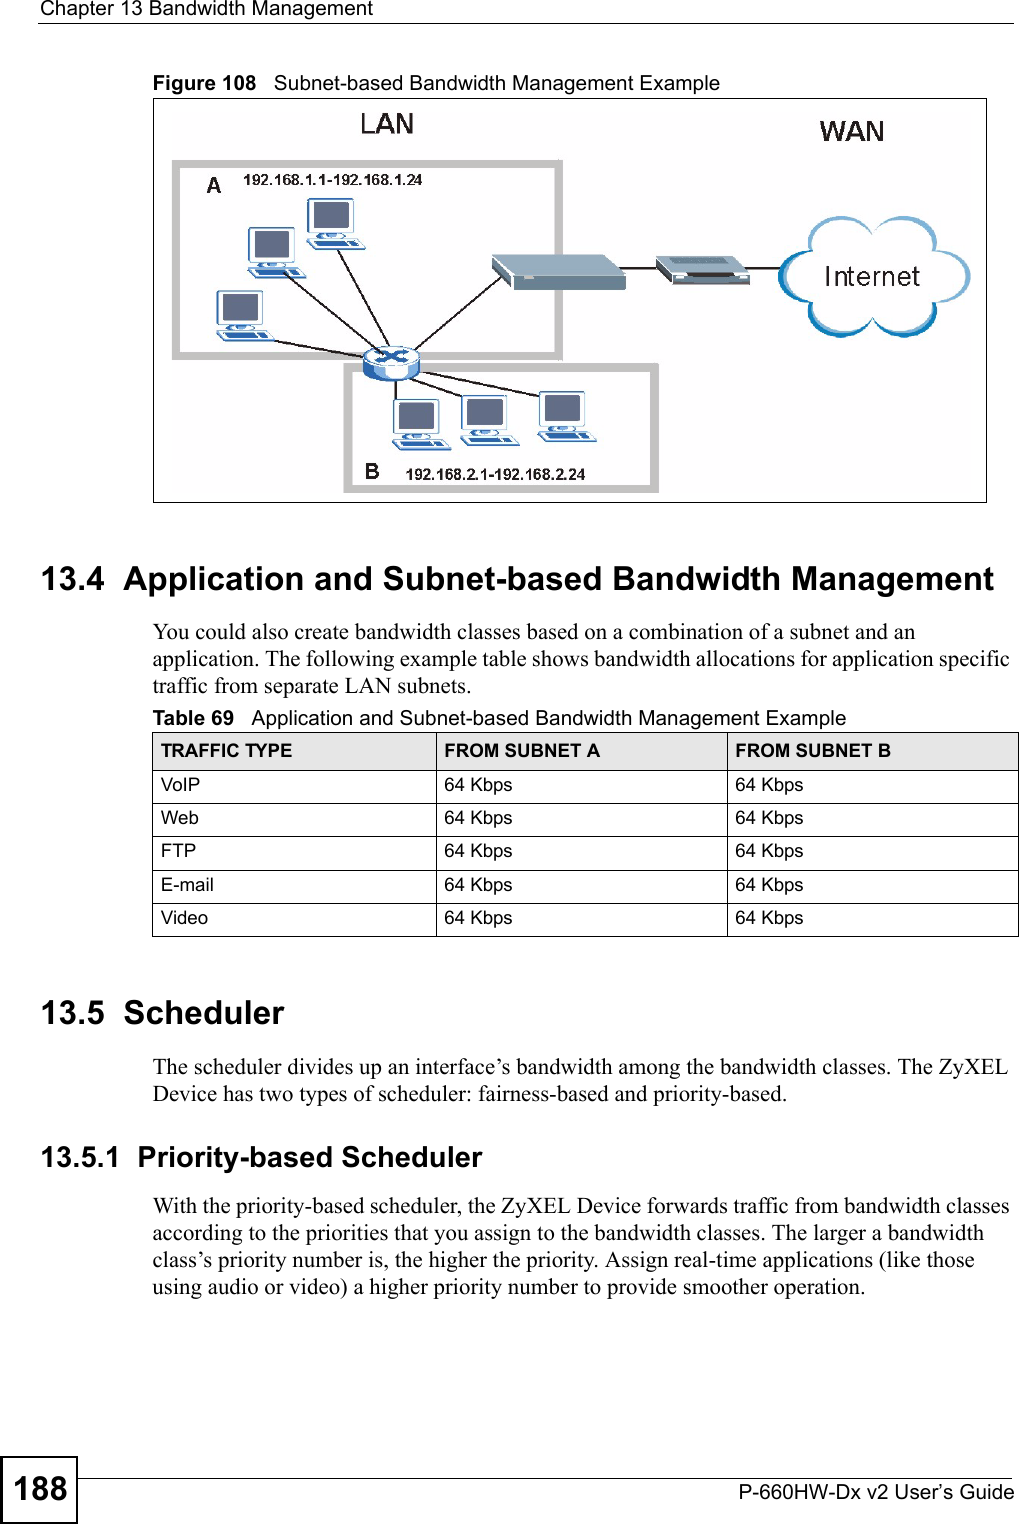 Chapter 13 Bandwidth ManagementP-660HW-Dx v2 User’s Guide188Figure 108   Subnet-based Bandwidth Management Example13.4  Application and Subnet-based Bandwidth ManagementYou could also create bandwidth classes based on a combination of a subnet and an application. The following example table shows bandwidth allocations for application specific traffic from separate LAN subnets.13.5  SchedulerThe scheduler divides up an interface’s bandwidth among the bandwidth classes. The ZyXEL Device has two types of scheduler: fairness-based and priority-based. 13.5.1  Priority-based SchedulerWith the priority-based scheduler, the ZyXEL Device forwards traffic from bandwidth classes according to the priorities that you assign to the bandwidth classes. The larger a bandwidth class’s priority number is, the higher the priority. Assign real-time applications (like those using audio or video) a higher priority number to provide smoother operation.Table 69   Application and Subnet-based Bandwidth Management Example TRAFFIC TYPE FROM SUBNET A FROM SUBNET BVoIP 64 Kbps 64 KbpsWeb 64 Kbps 64 KbpsFTP 64 Kbps 64 KbpsE-mail 64 Kbps 64 KbpsVideo 64 Kbps 64 Kbps